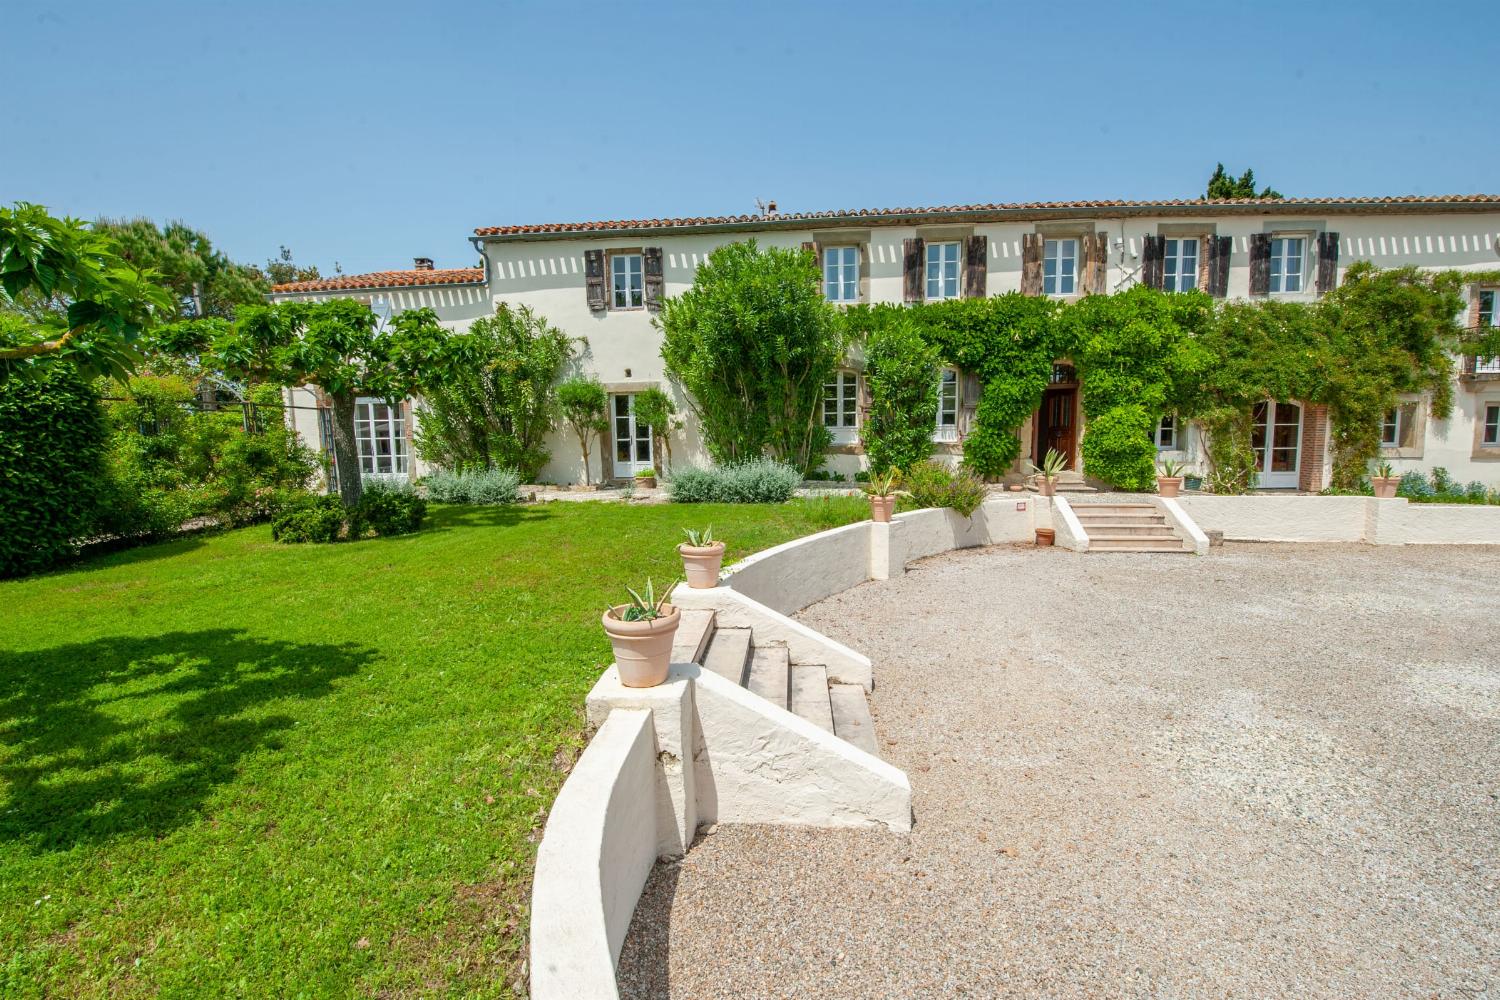 Holiday villa in the South of France